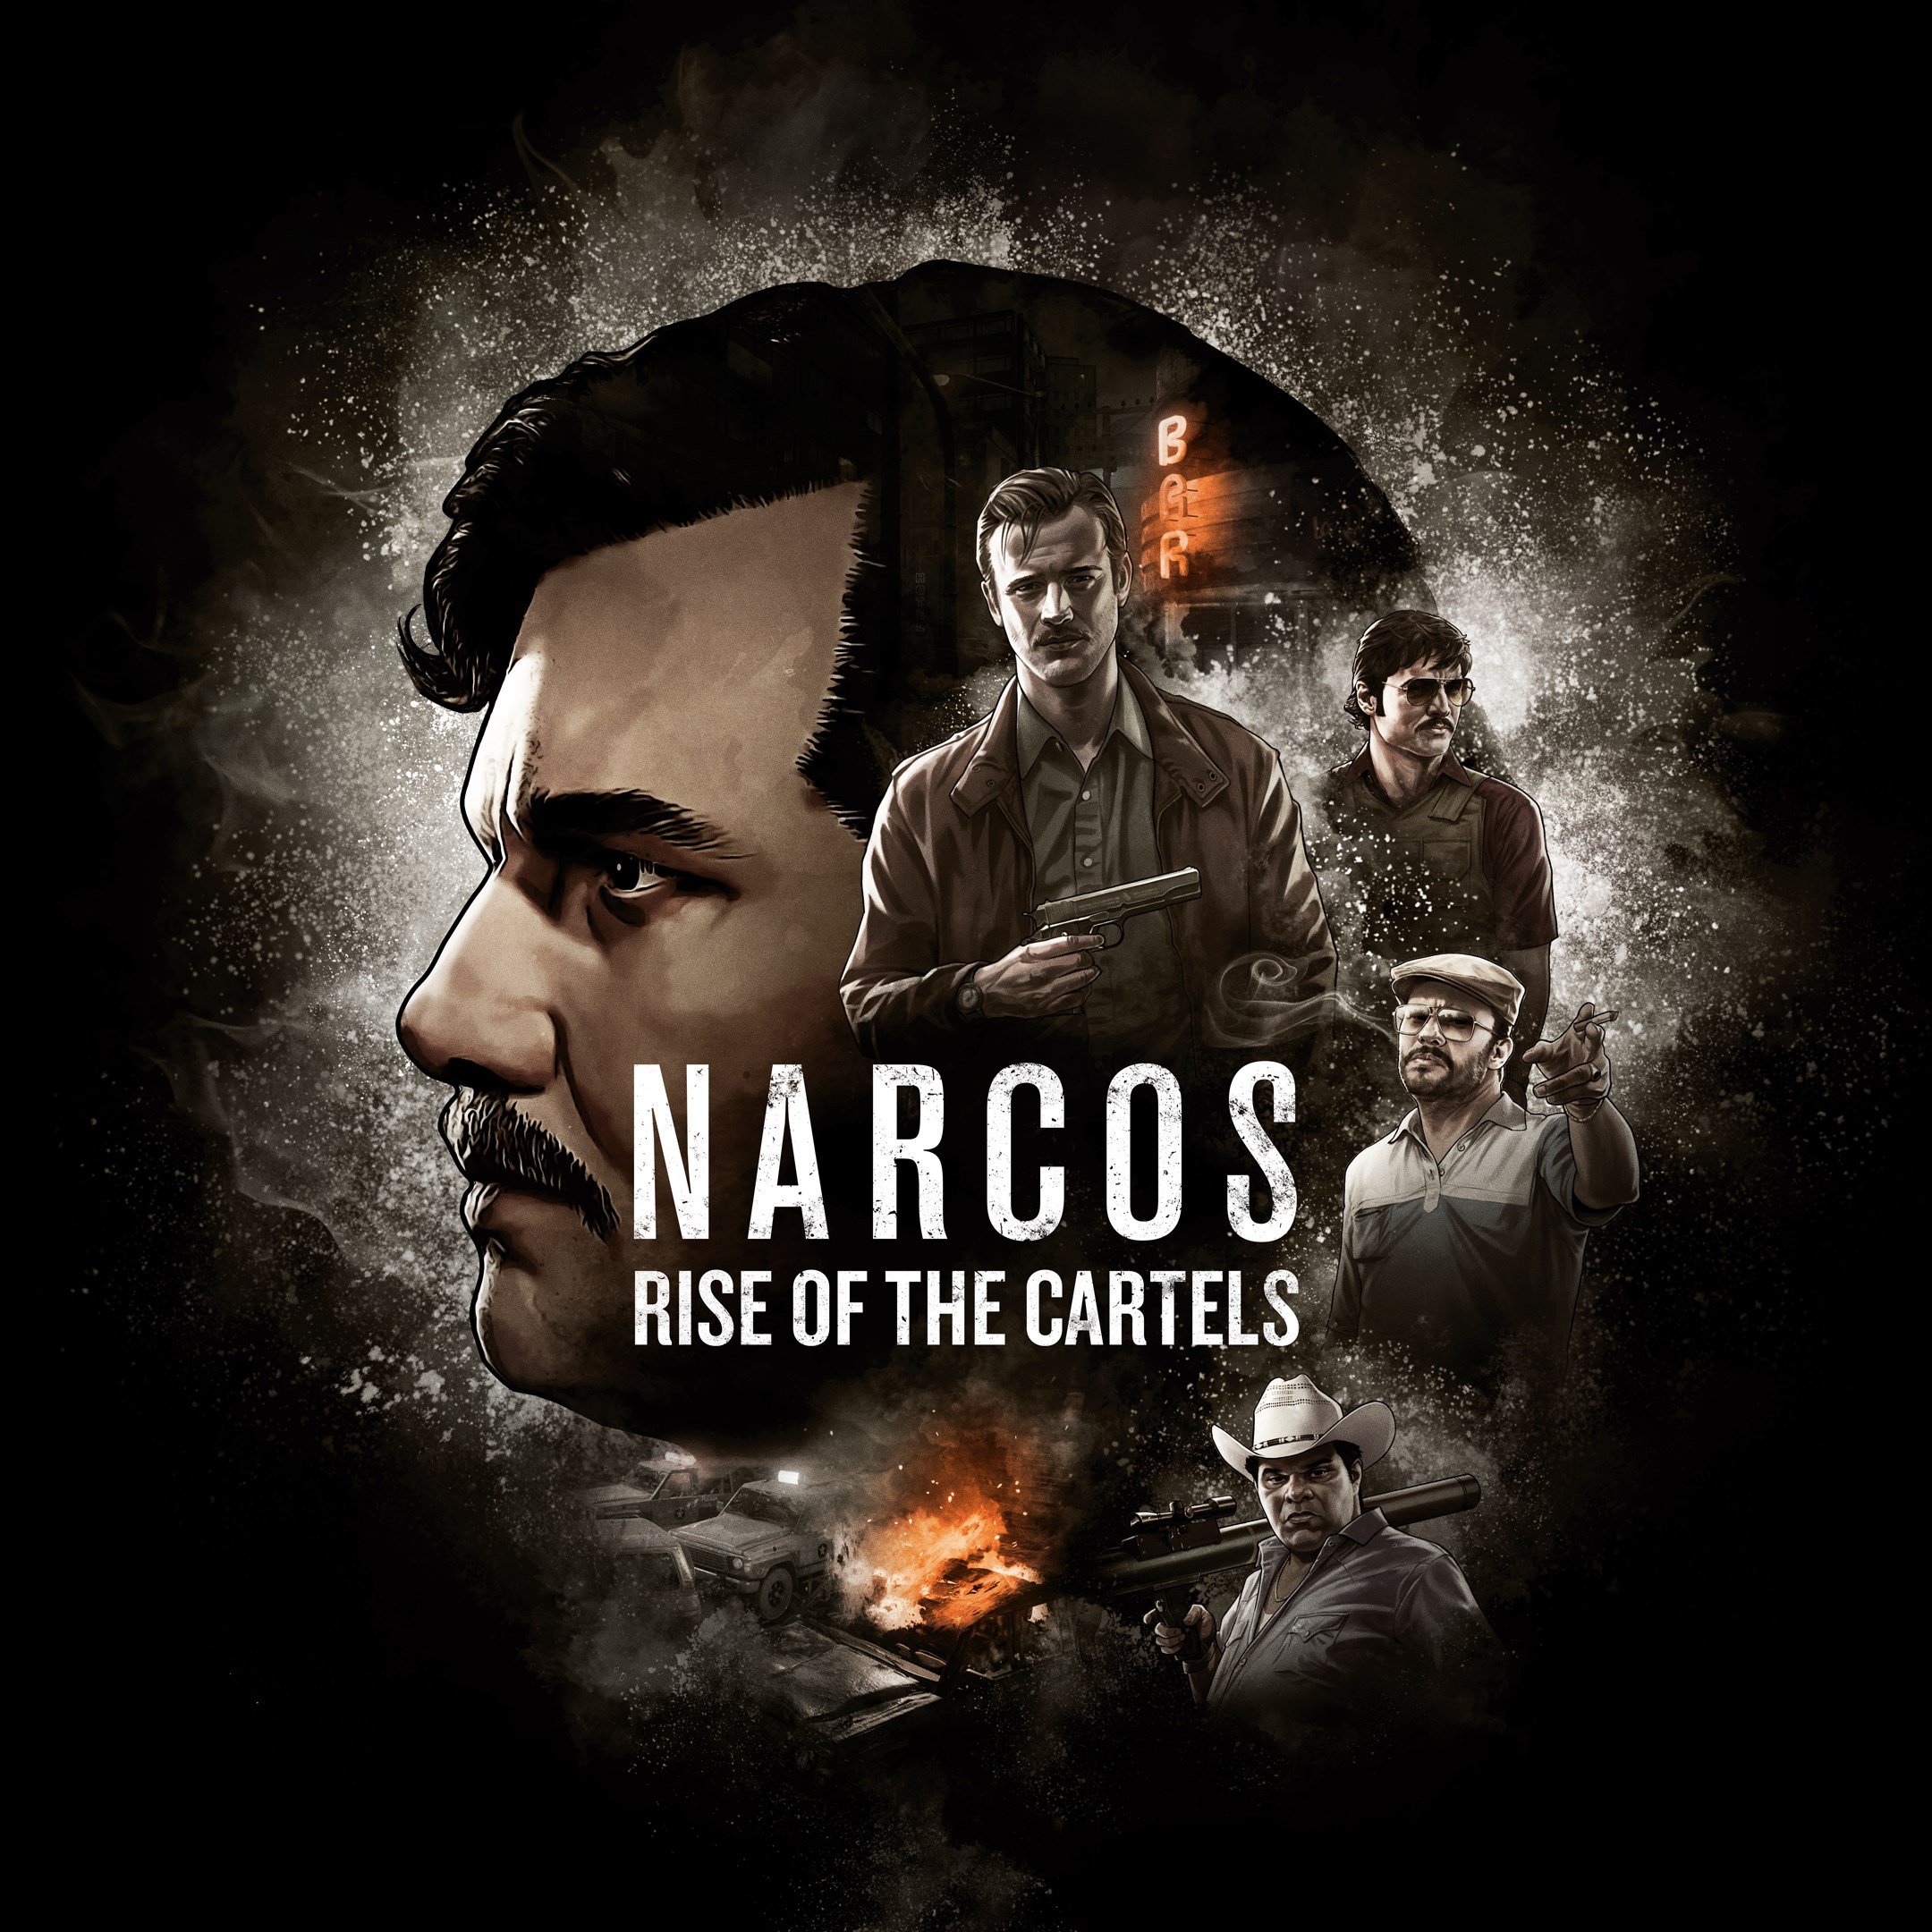 Boxart for Narcos: Rise of the Cartels